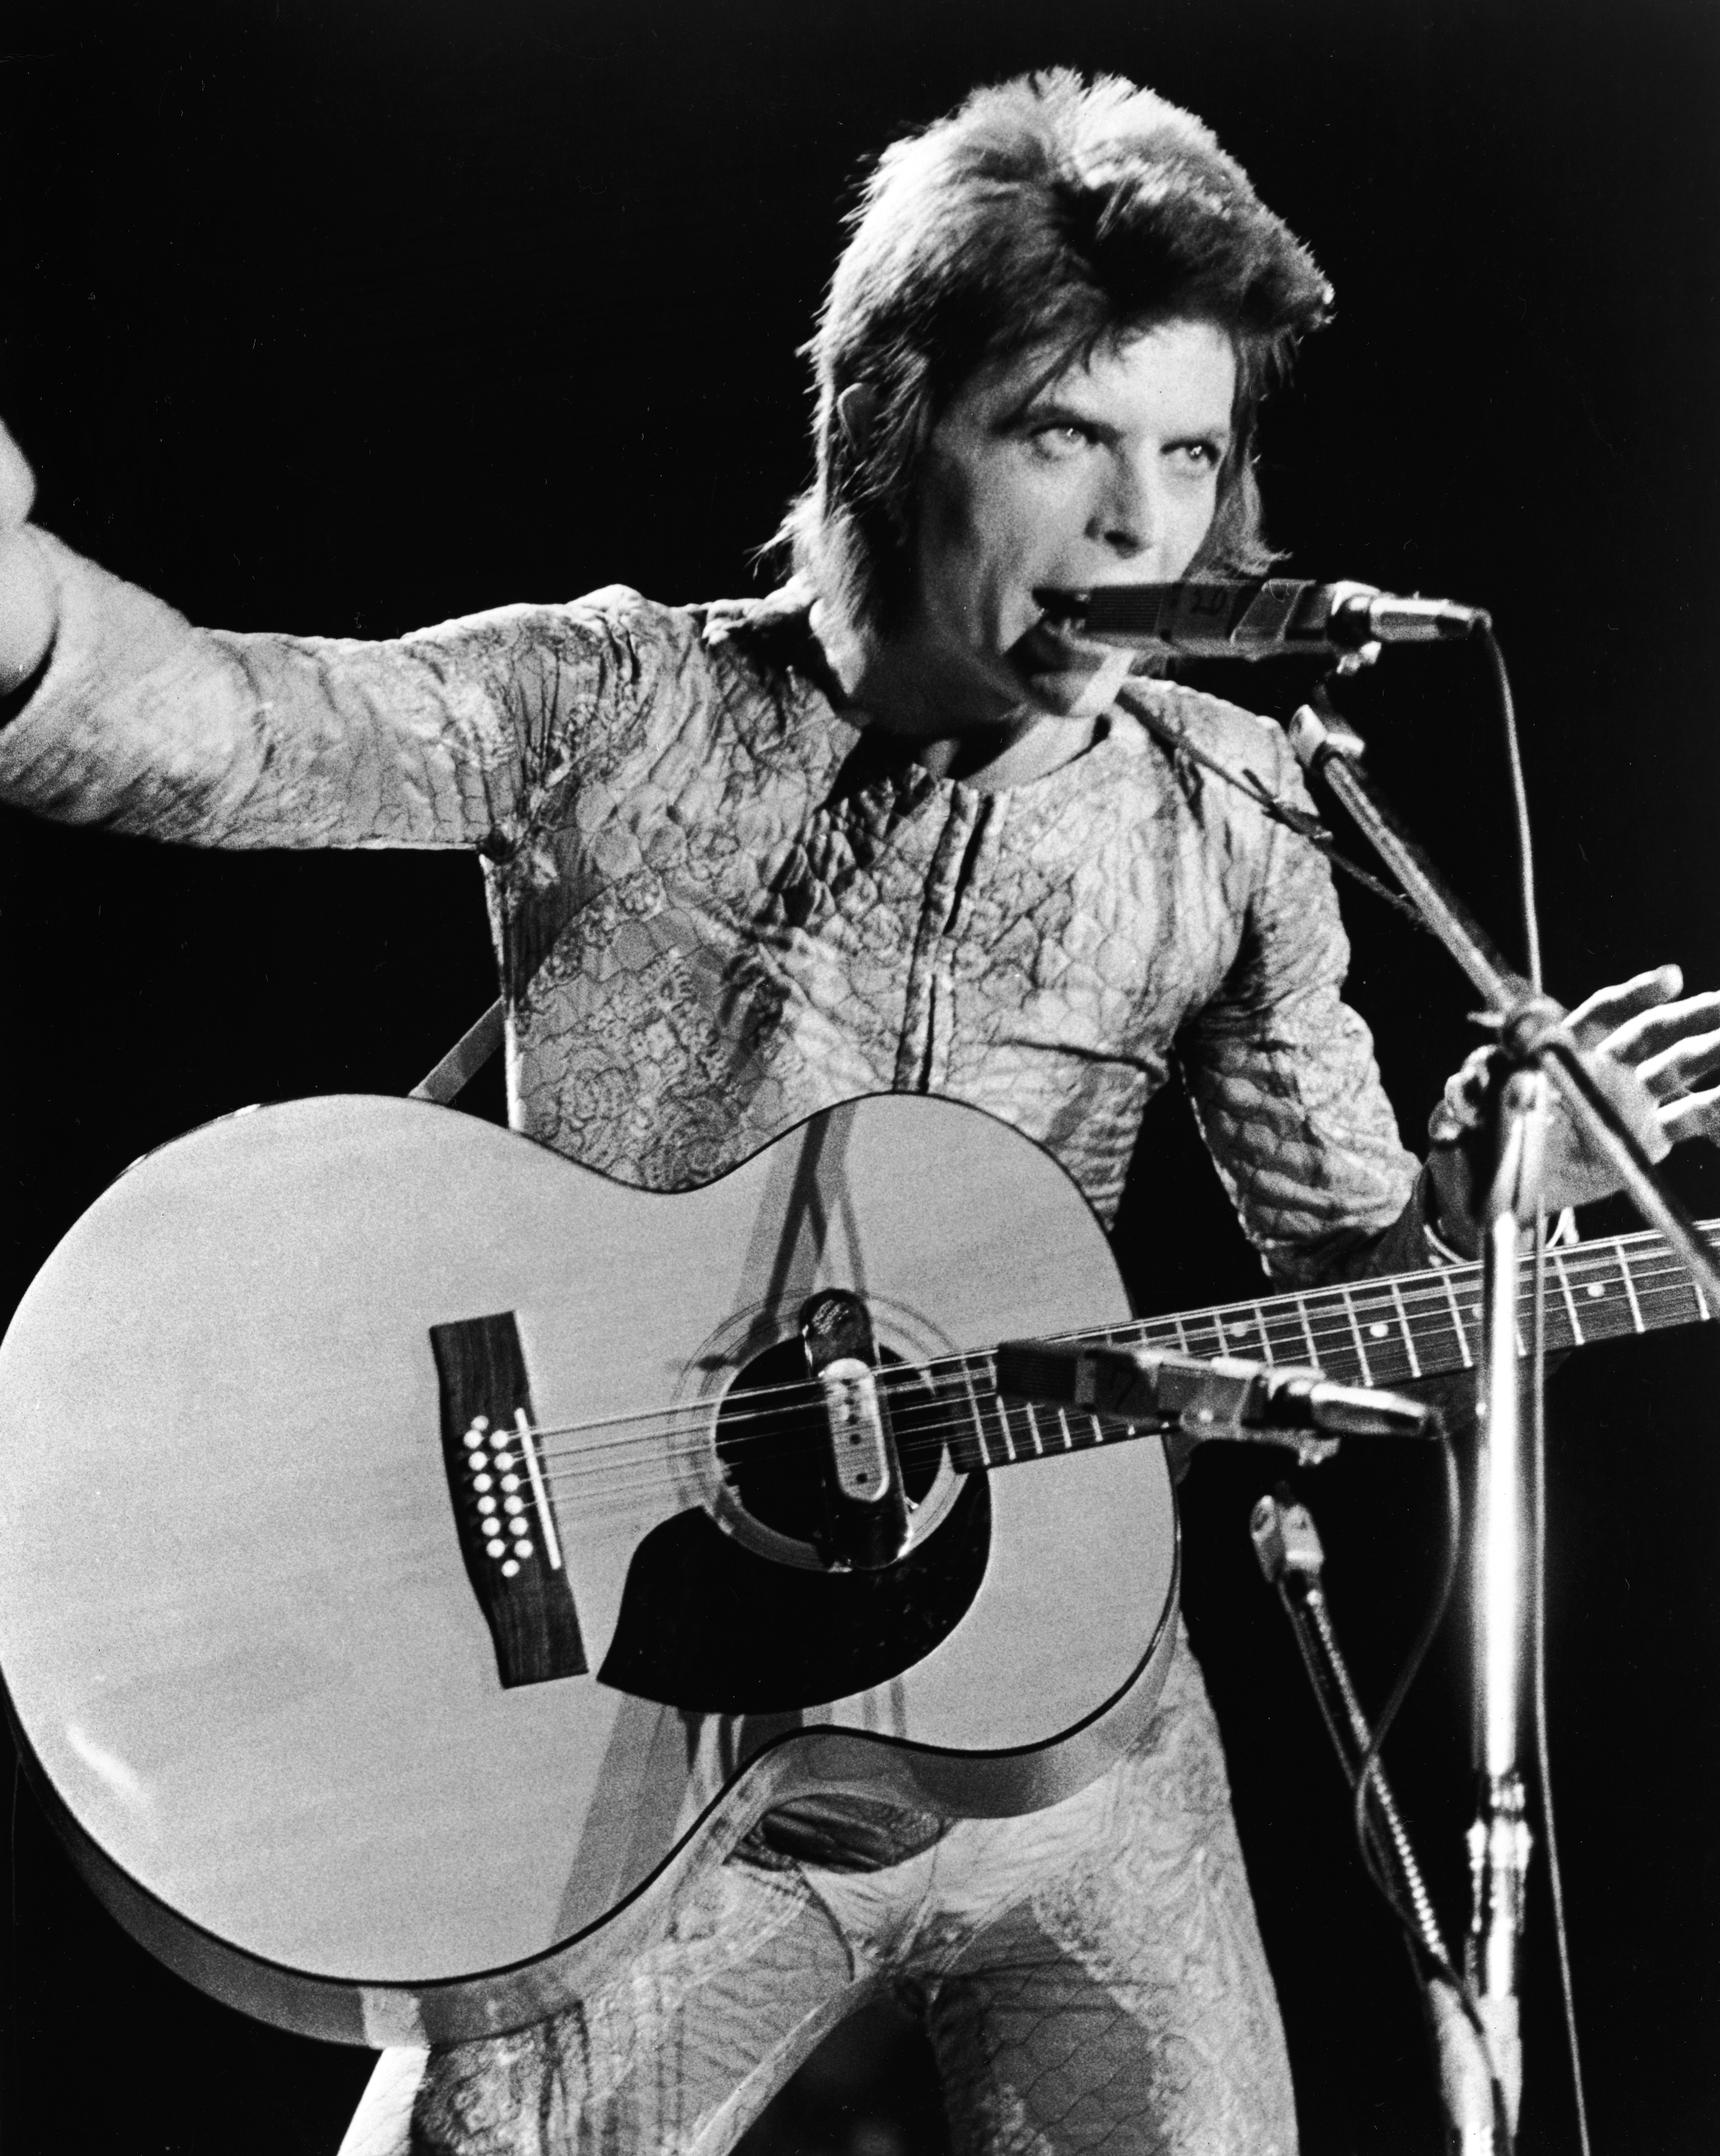 David Bowie Performing As Ziggy Stardust